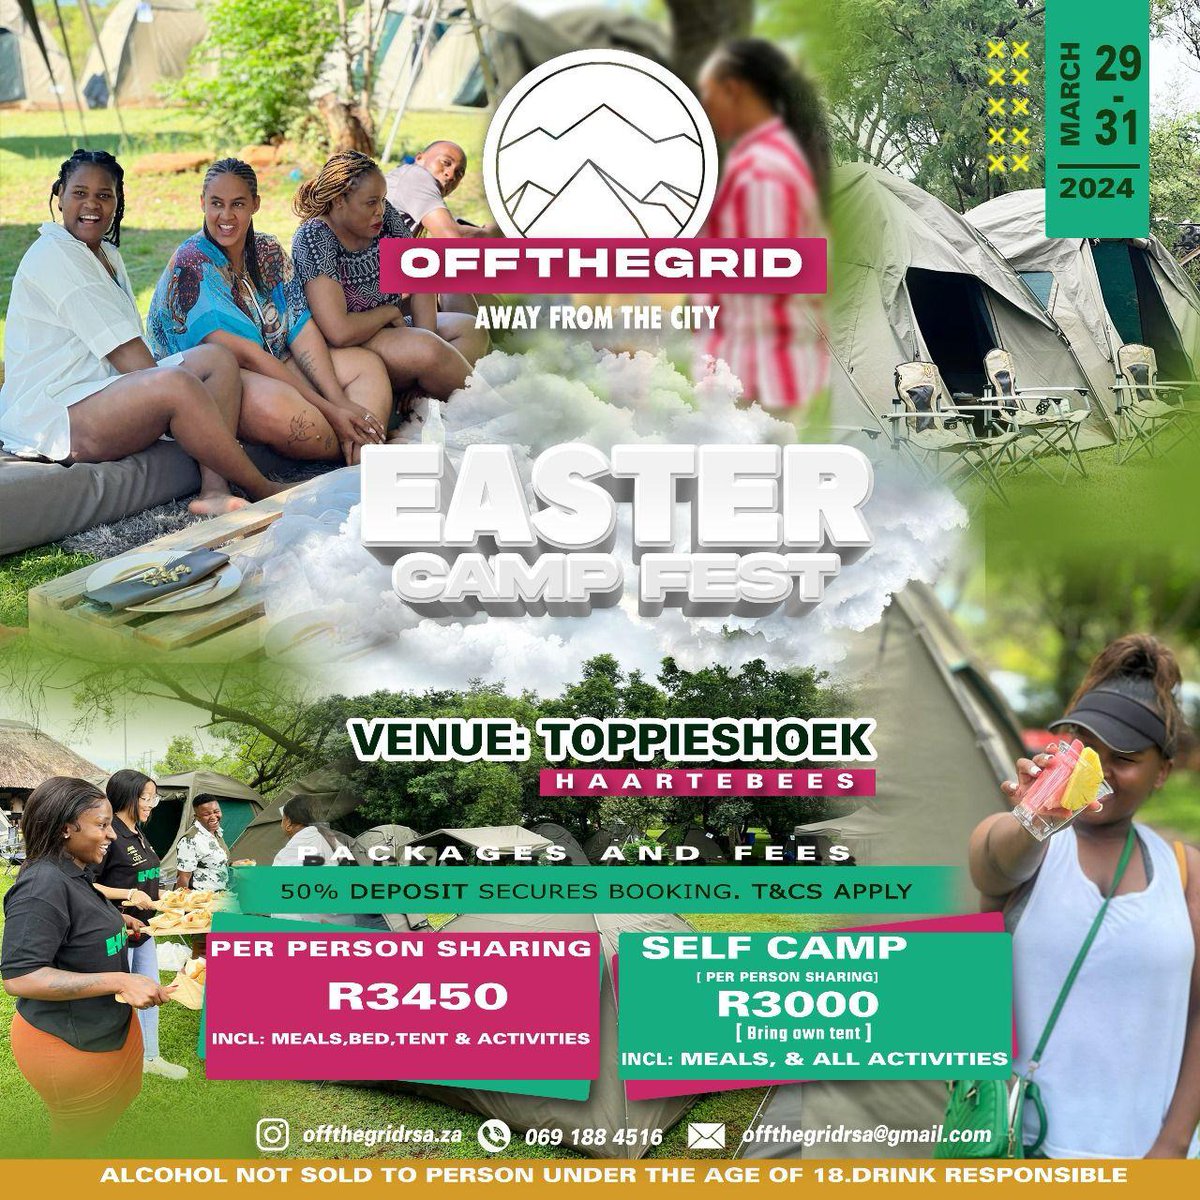 If you don't have plans for Easter, look no further. Limited space available. Book your Tent now. #OFFTHEGRID #AWAYFROMTHECITY.